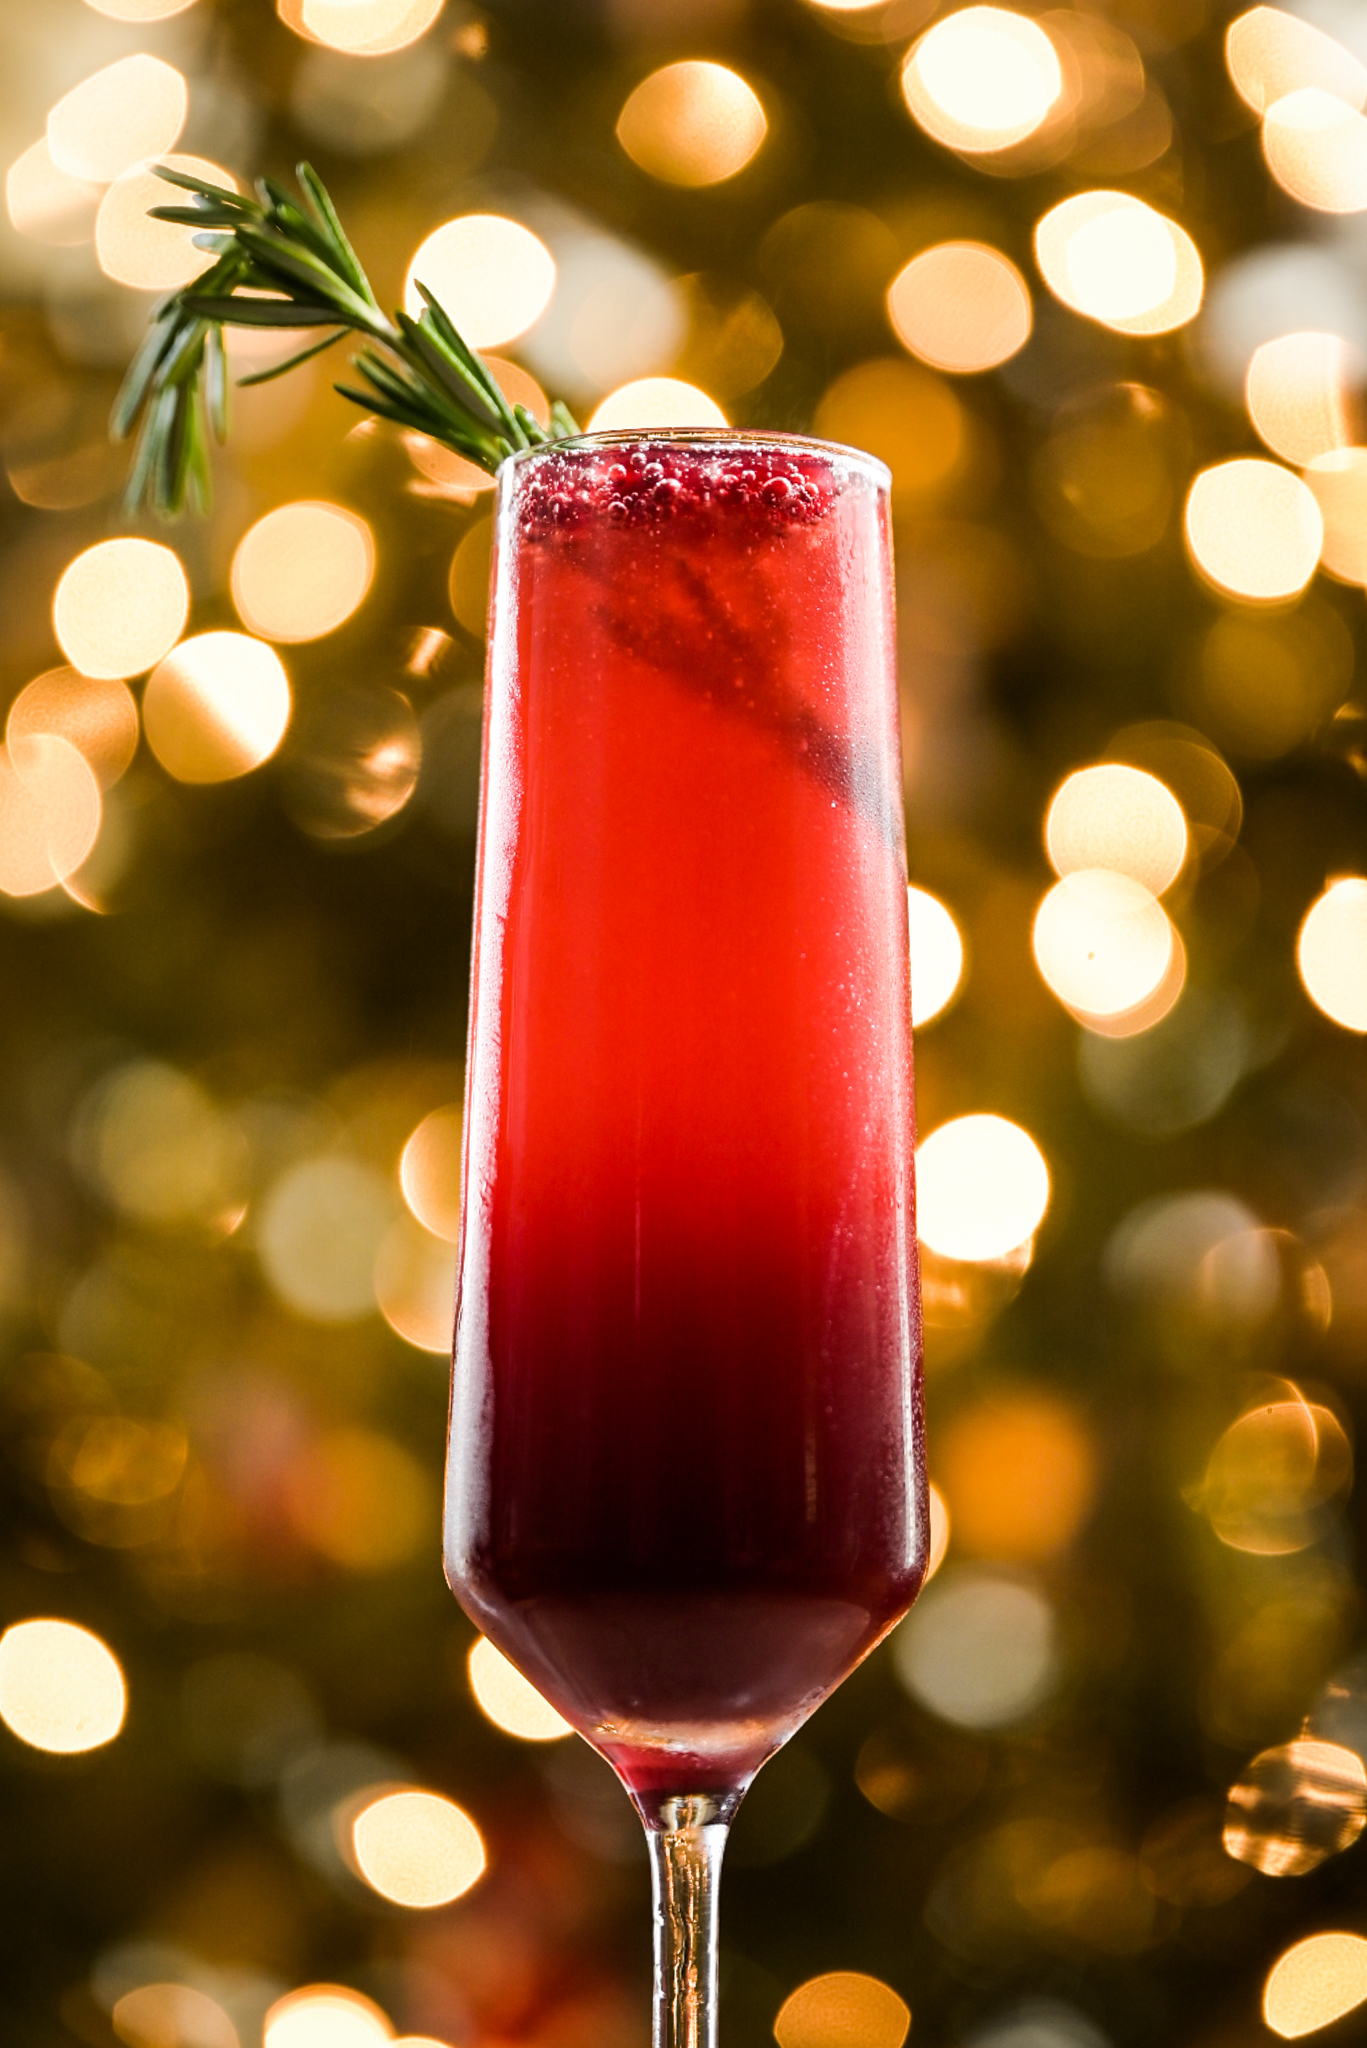 A holiday cocktail featuring California pomegranate juice and arils